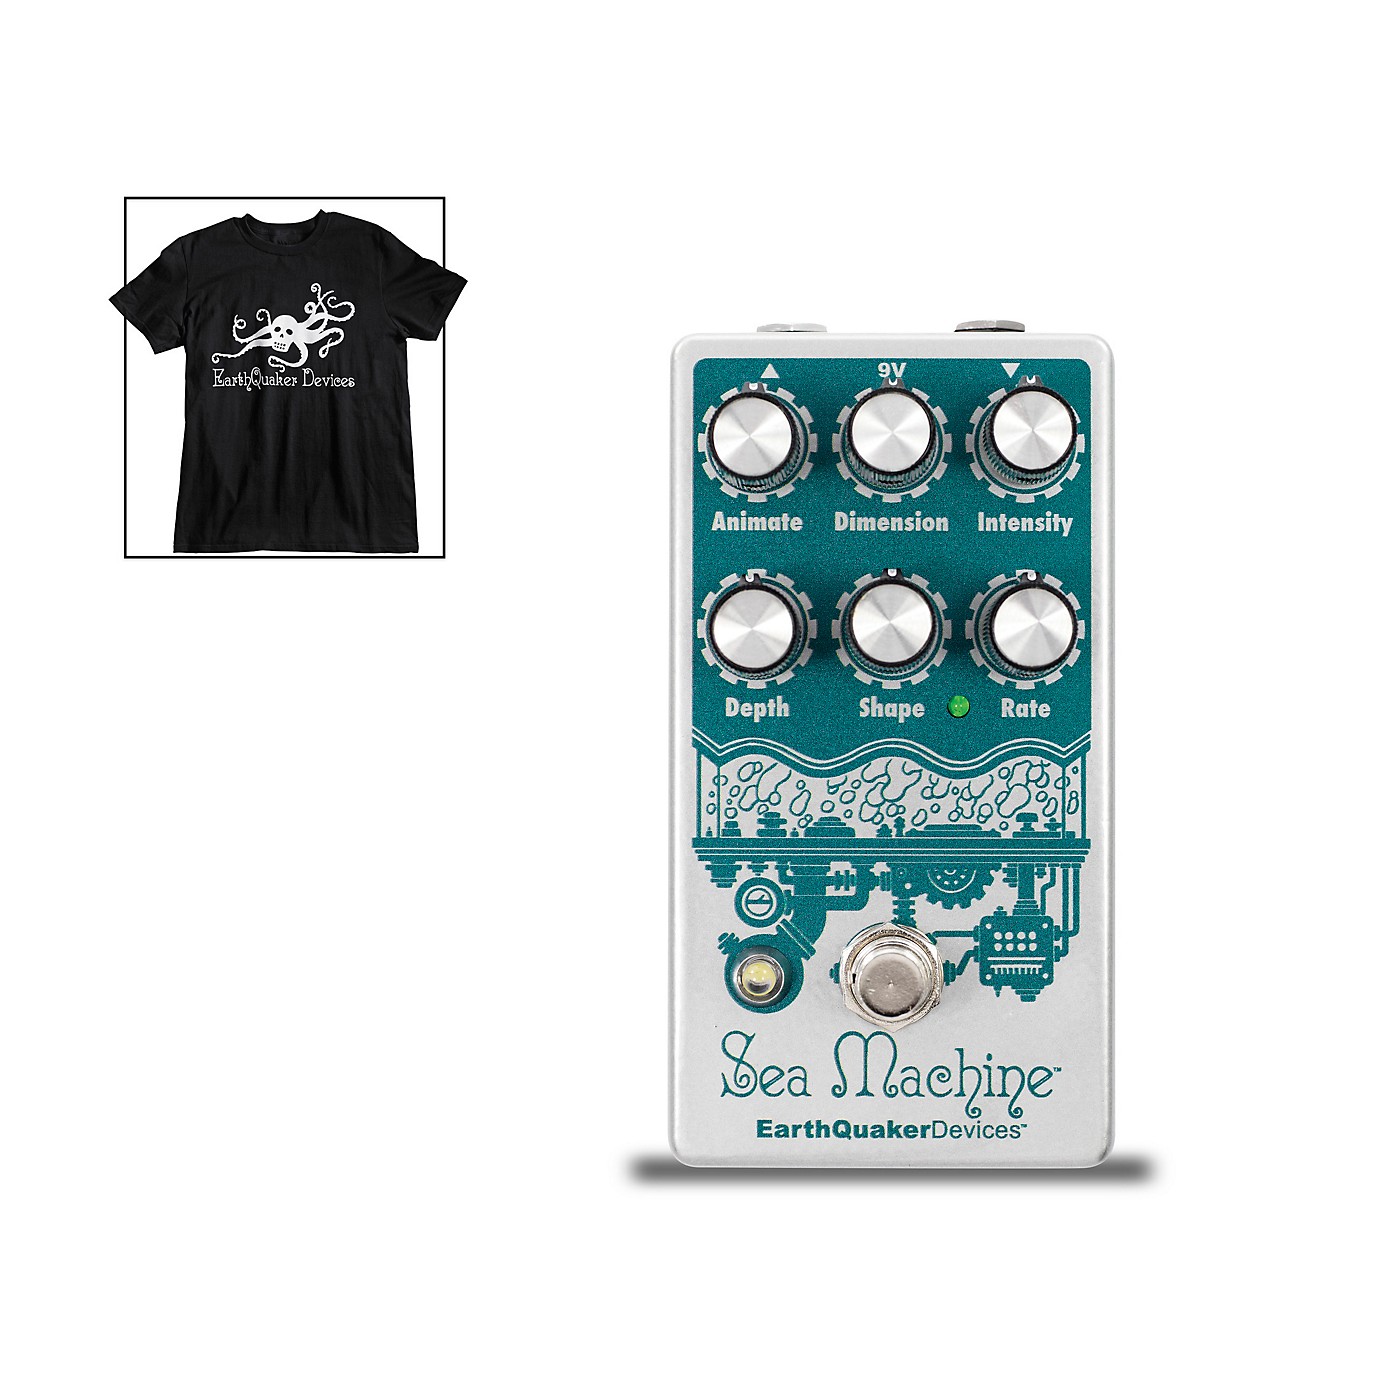 EarthQuaker Devices Sea Machine Super Chorus Guitar Effects Pedal v3 and Octoskull T-Shirt Large Black thumbnail